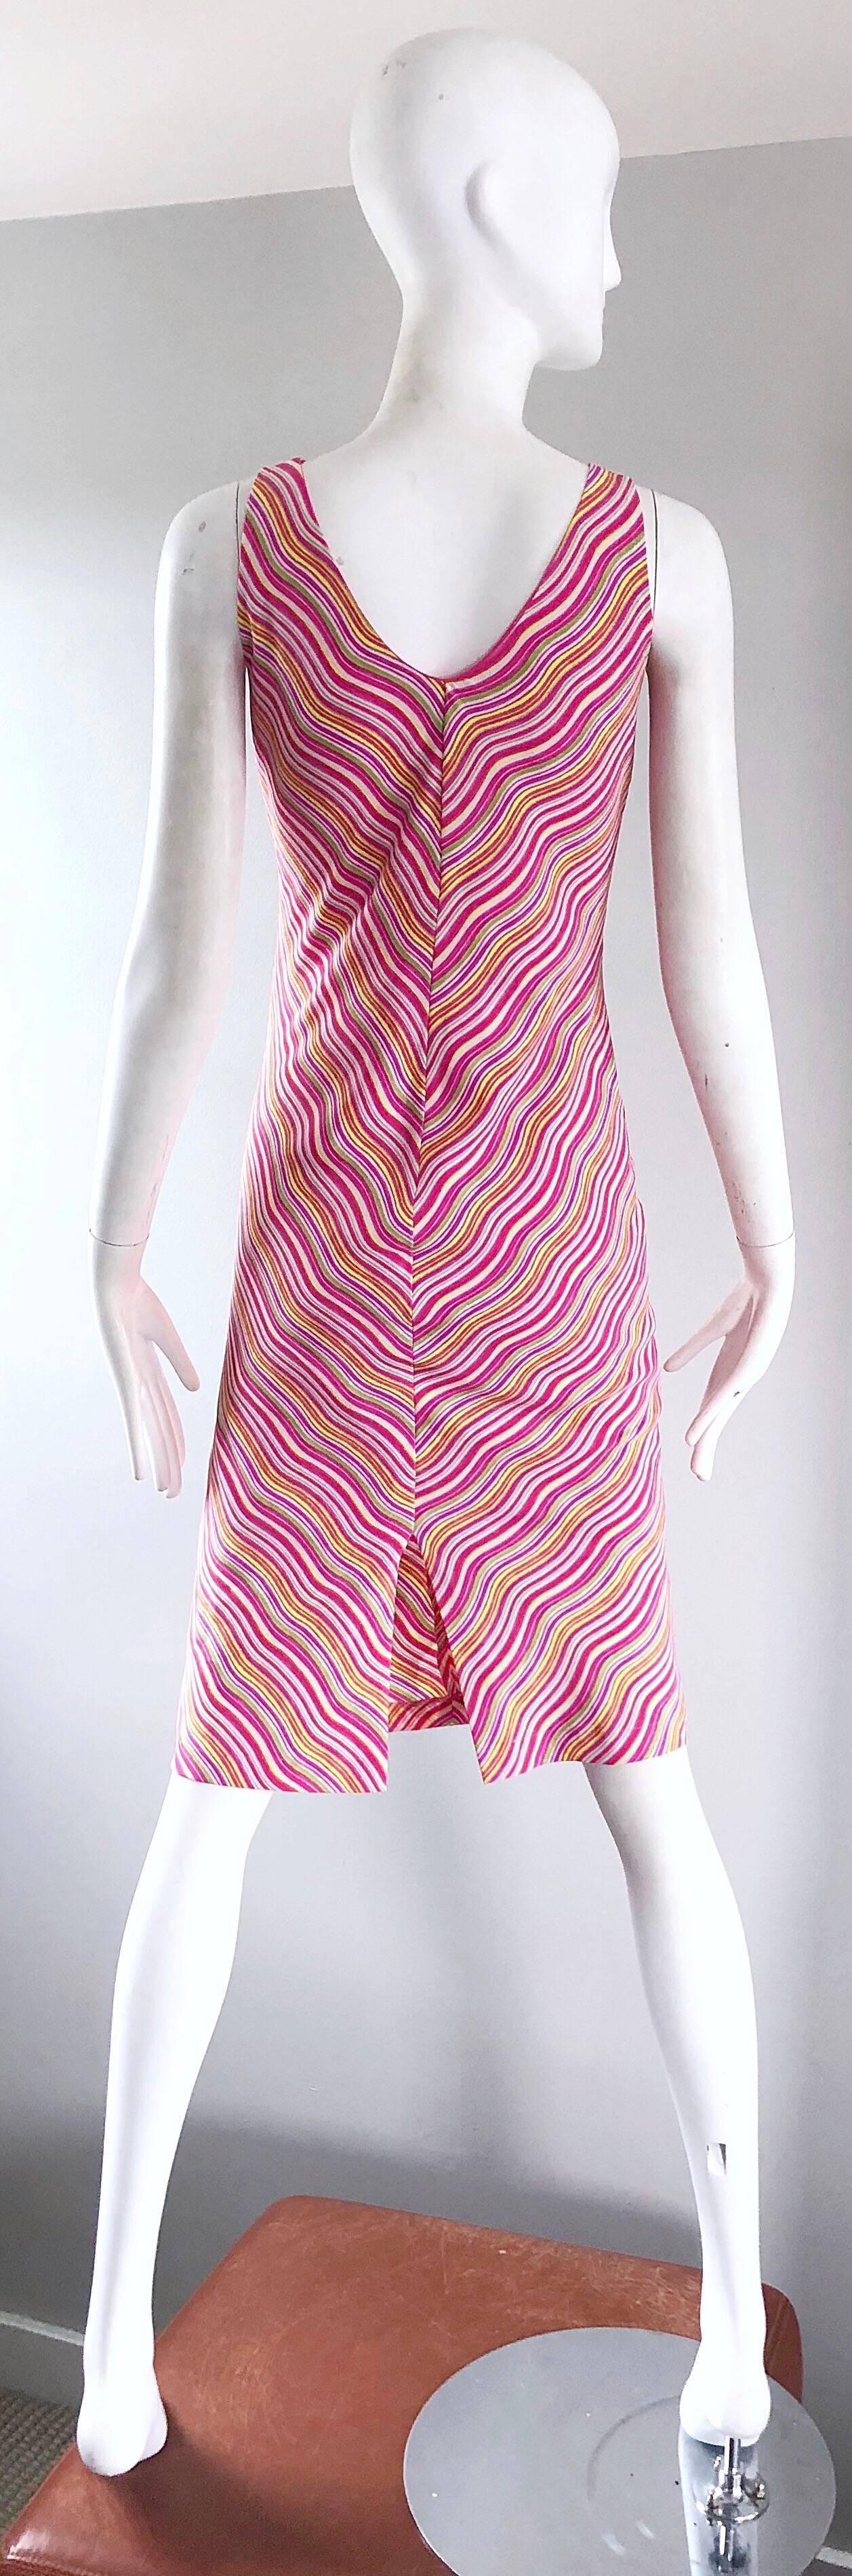 1990s Krizia Candy Stripe Op - Art Pink Squiggle 90s Vintage Silk Shift Dress  In Excellent Condition For Sale In San Diego, CA